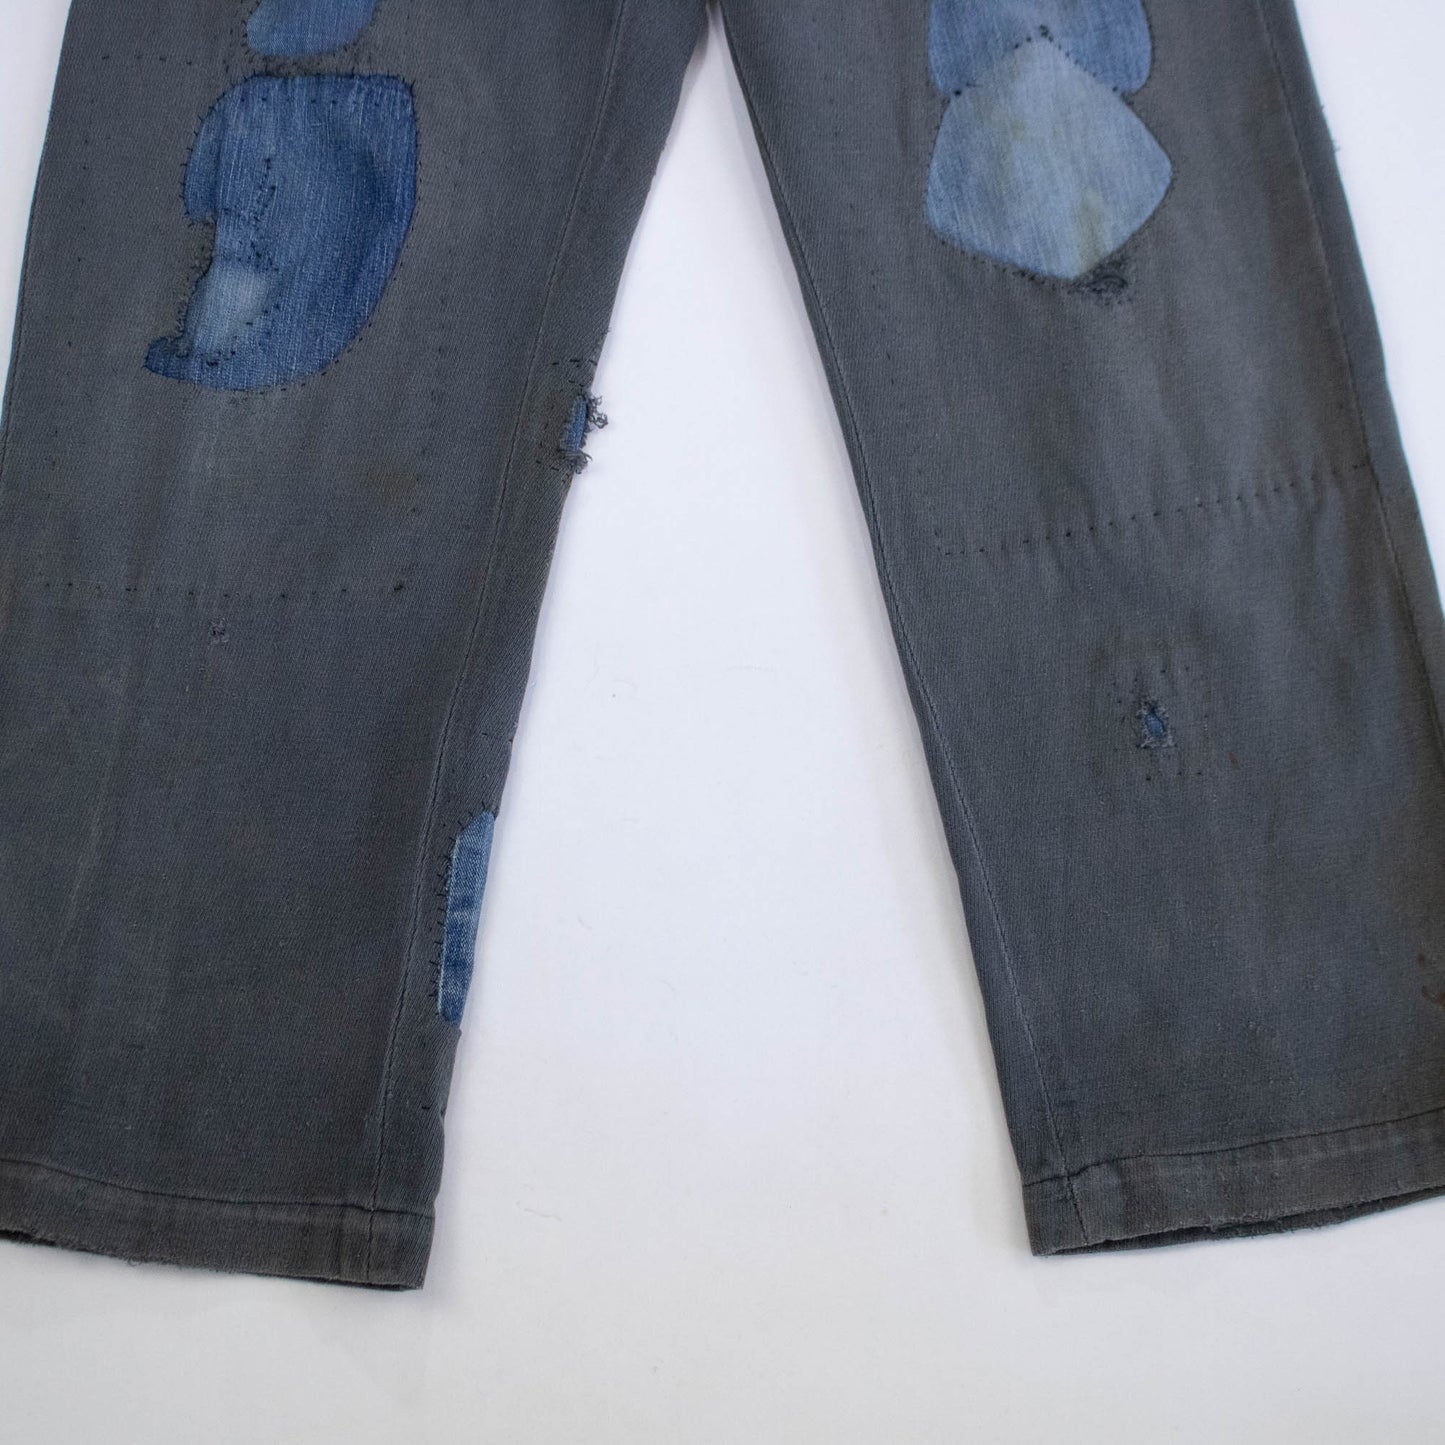 Pointer Brand 40s/50s Whipcord Pants with Original Denim Repairs